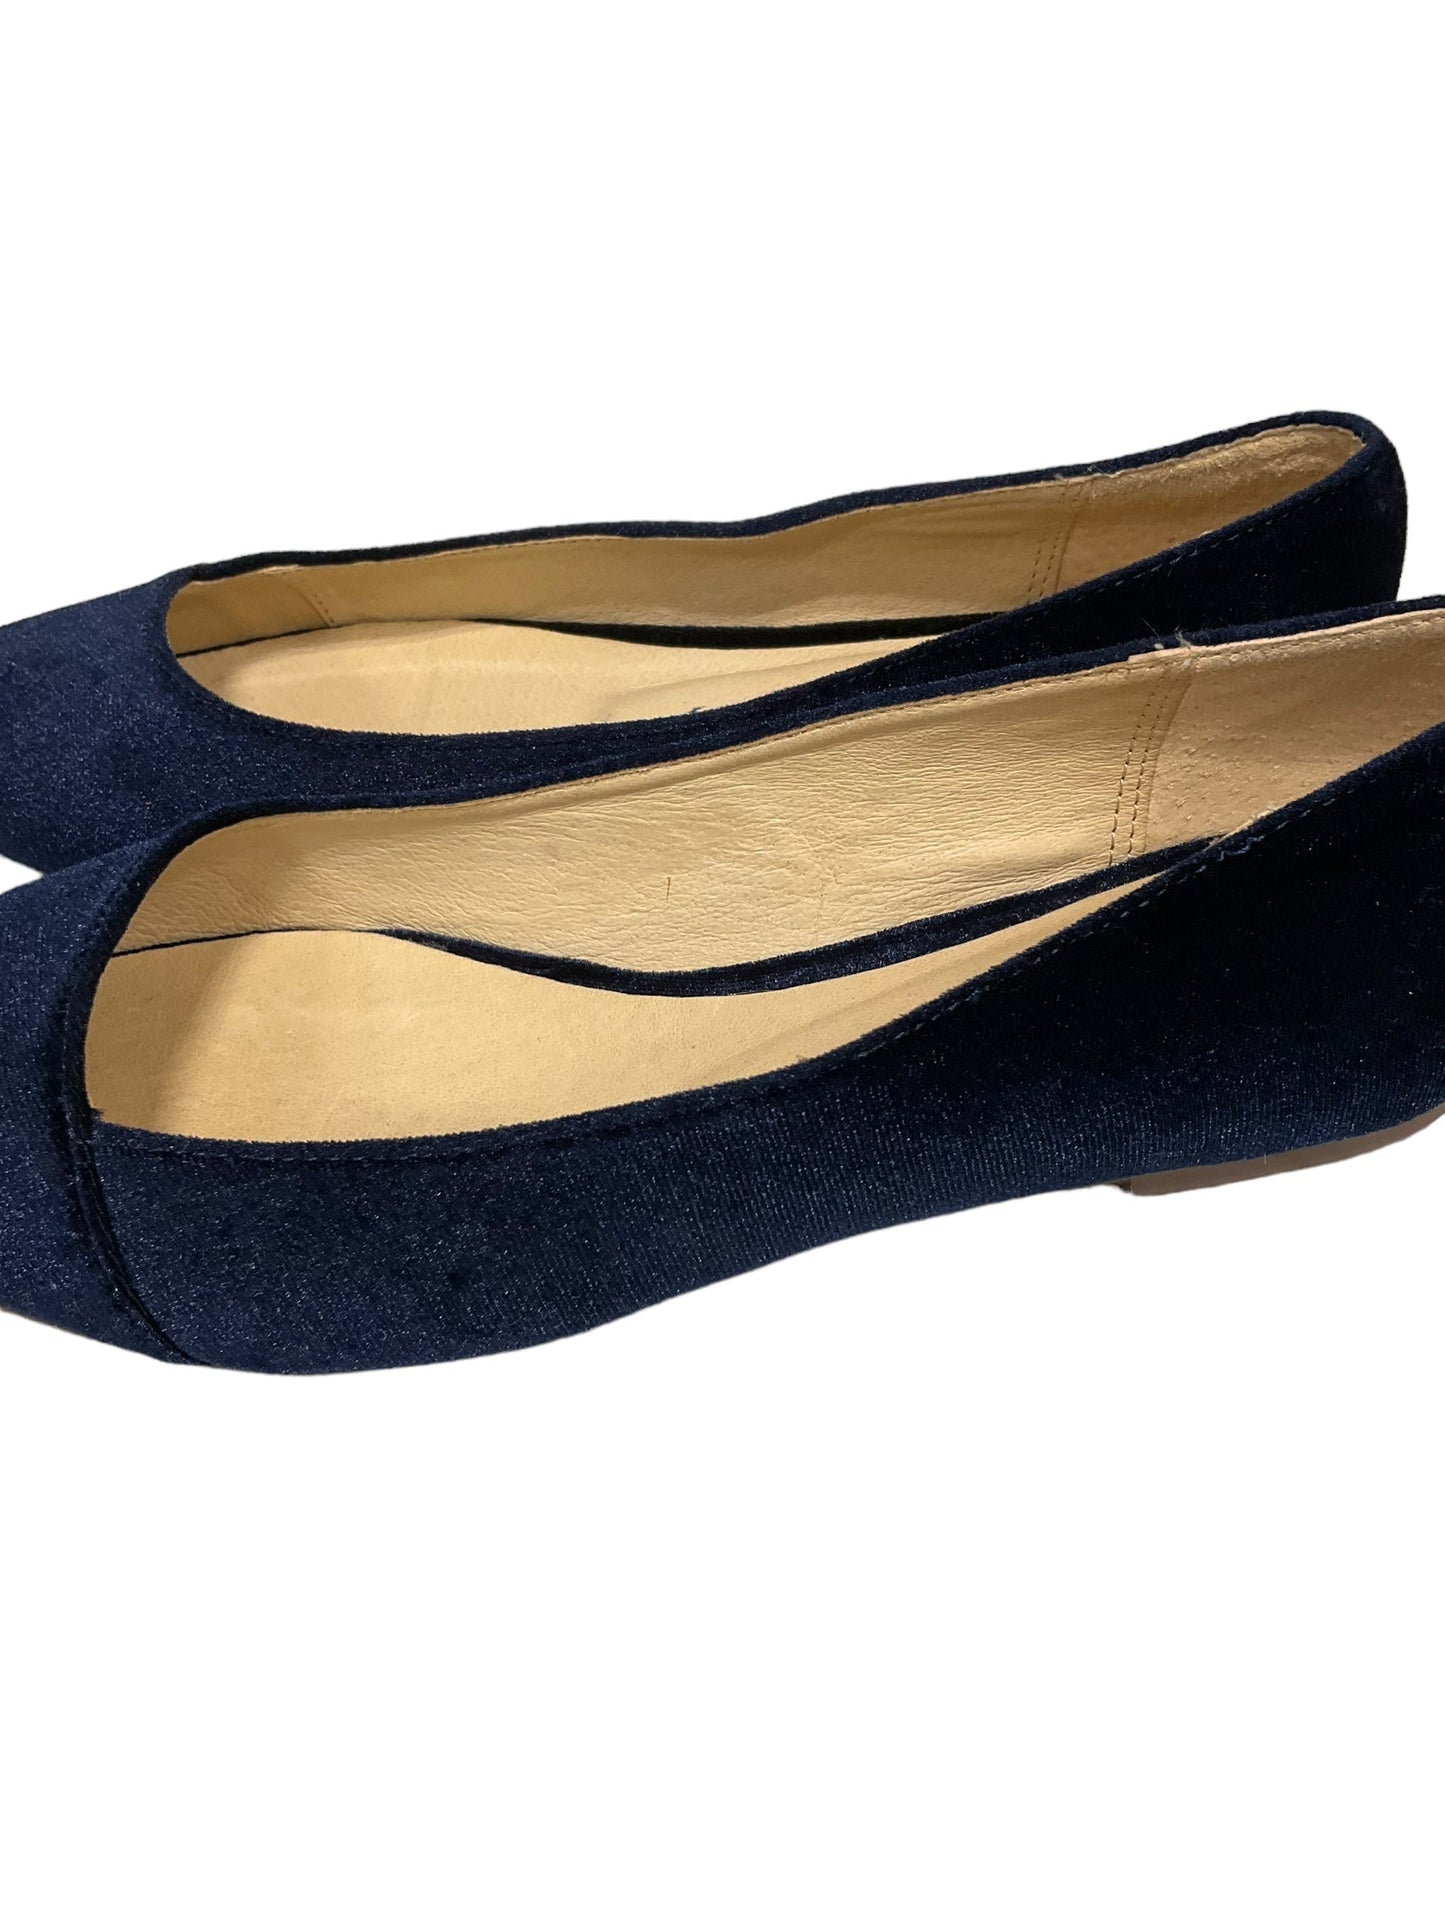 Shoes Flats Ballet By Clothes Mentor  Size: 9